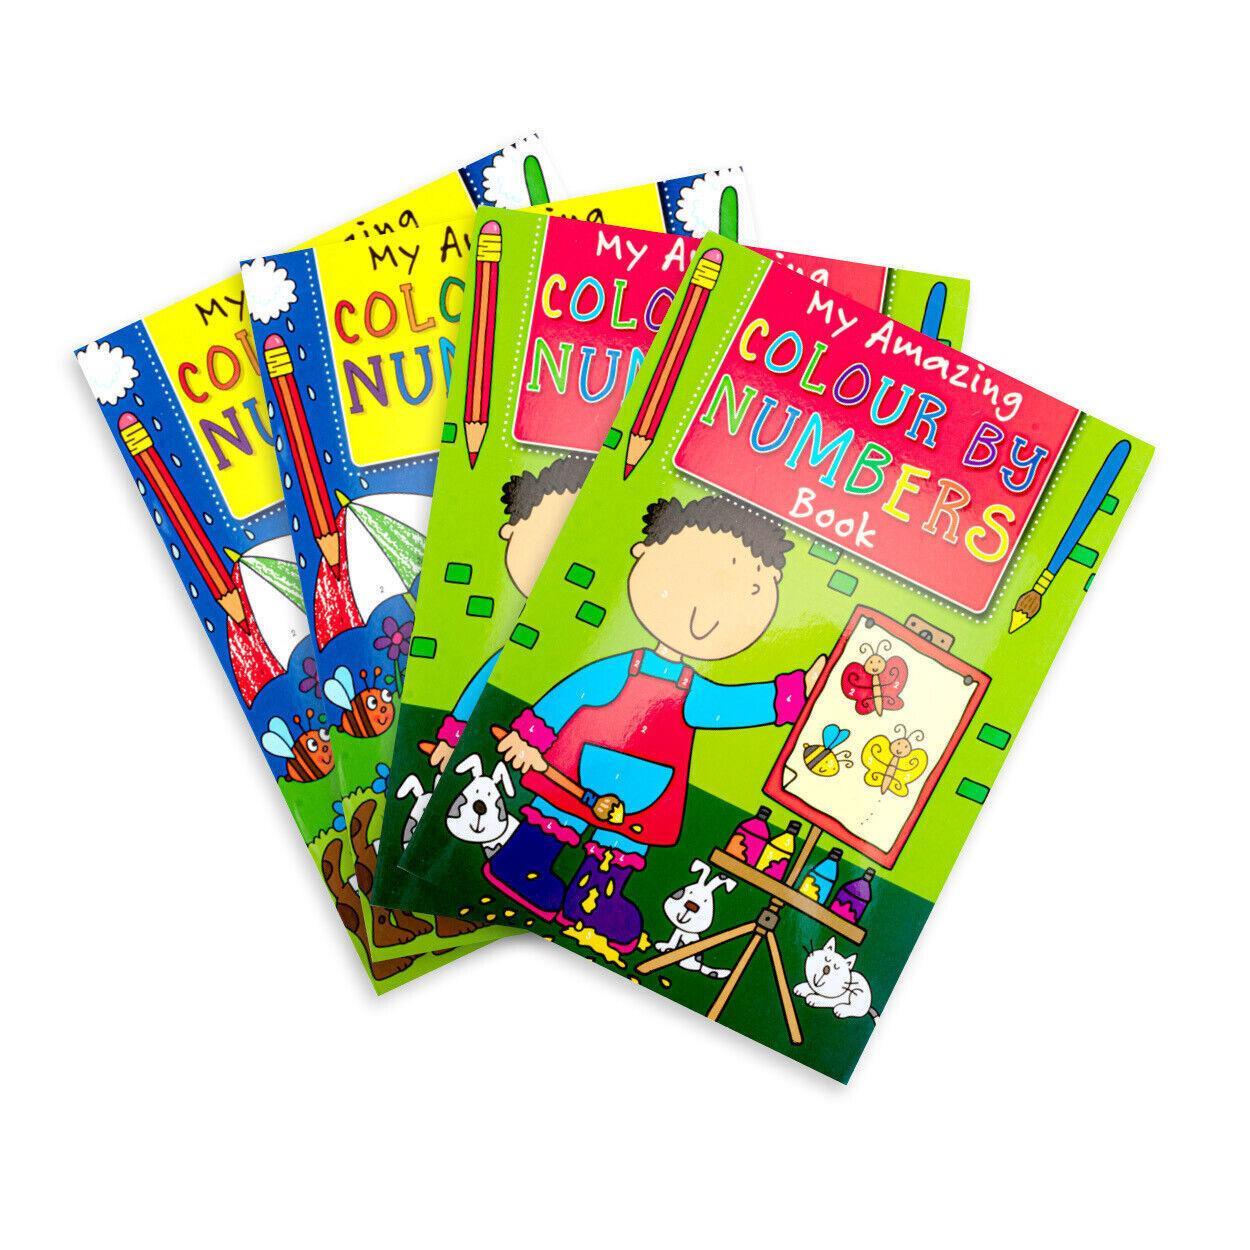 4PCS Colouring By Numbers Books Fun Relaxing Creative 32PG 295mm x 210mm